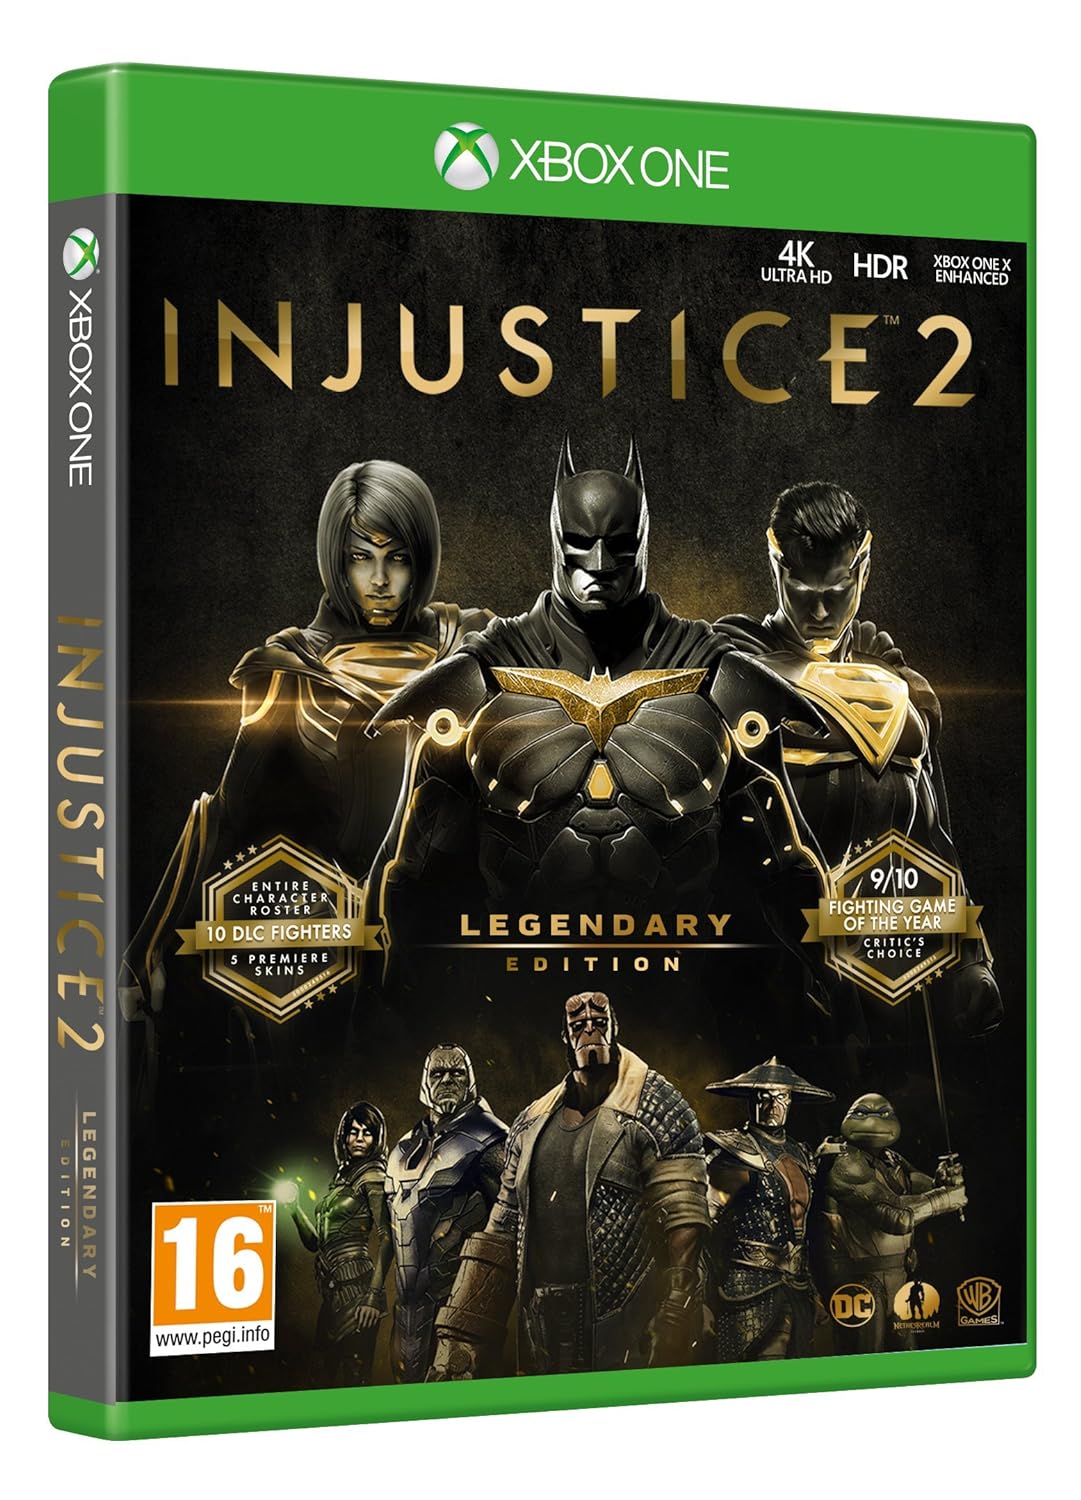 Xbox-One-Injustice-2-tech-junction-store.